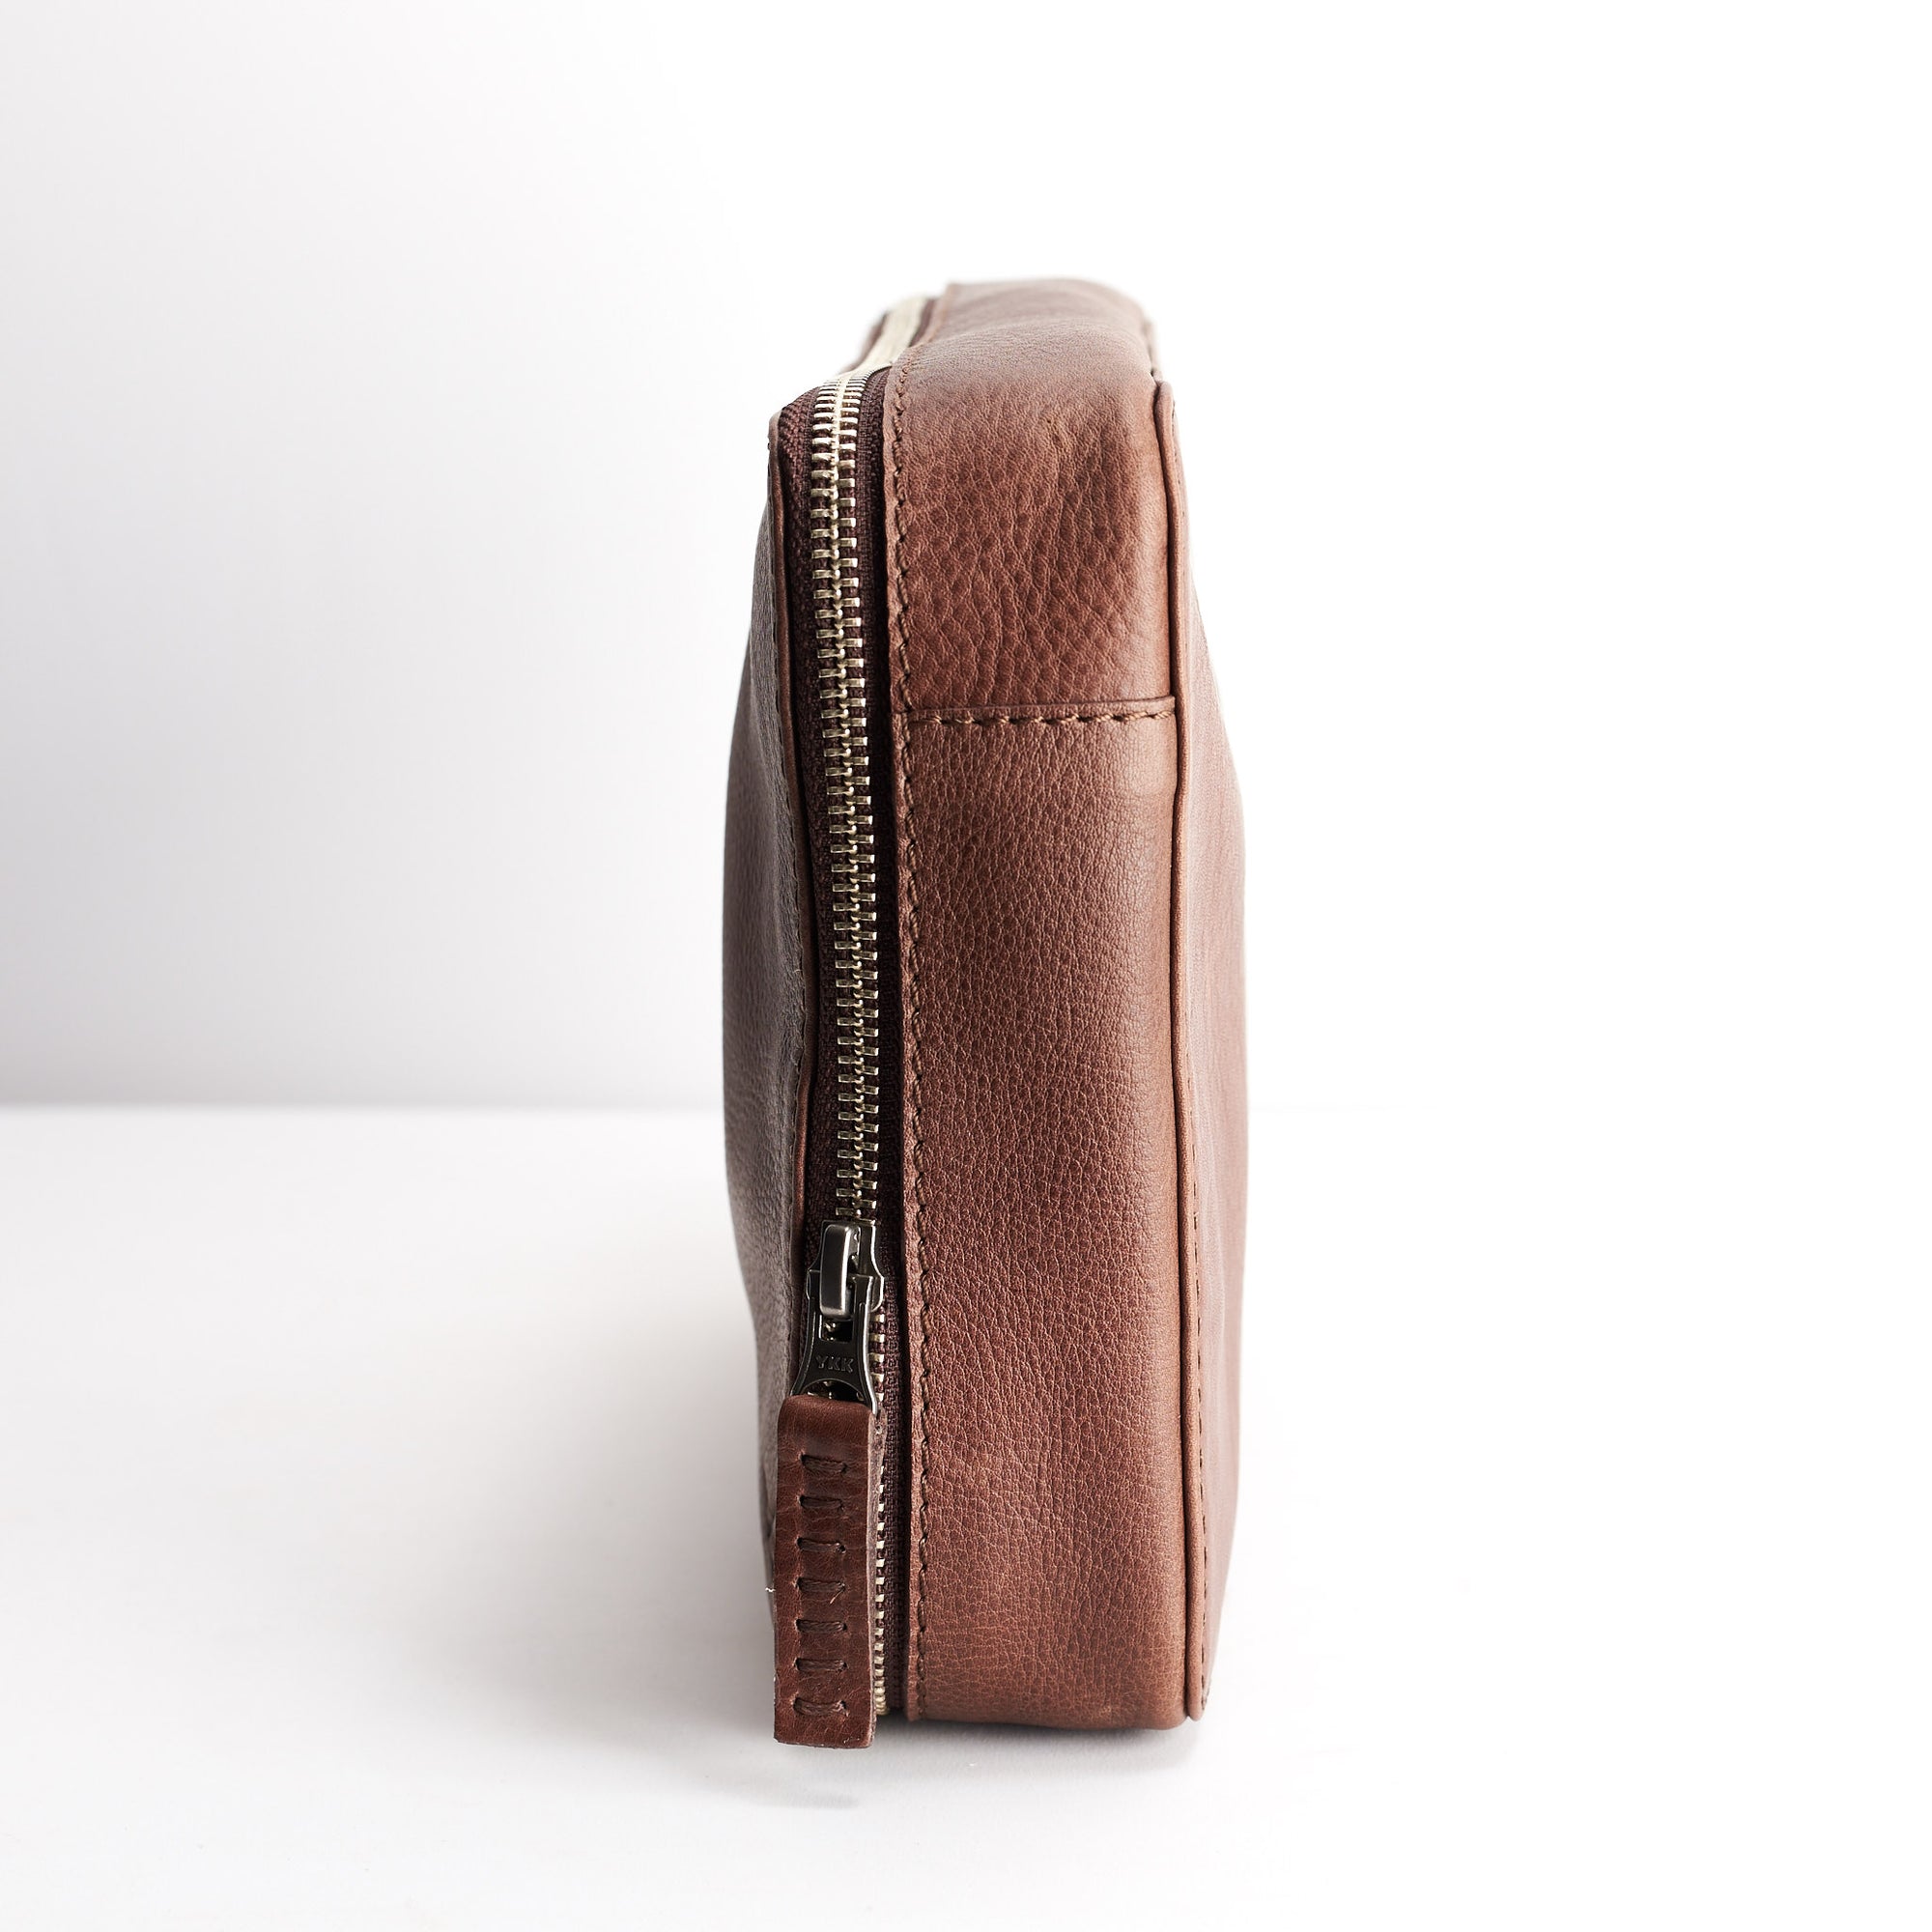 Slim profile. Leather essentials bag for iPad. Travel bag. Tech devices pockets